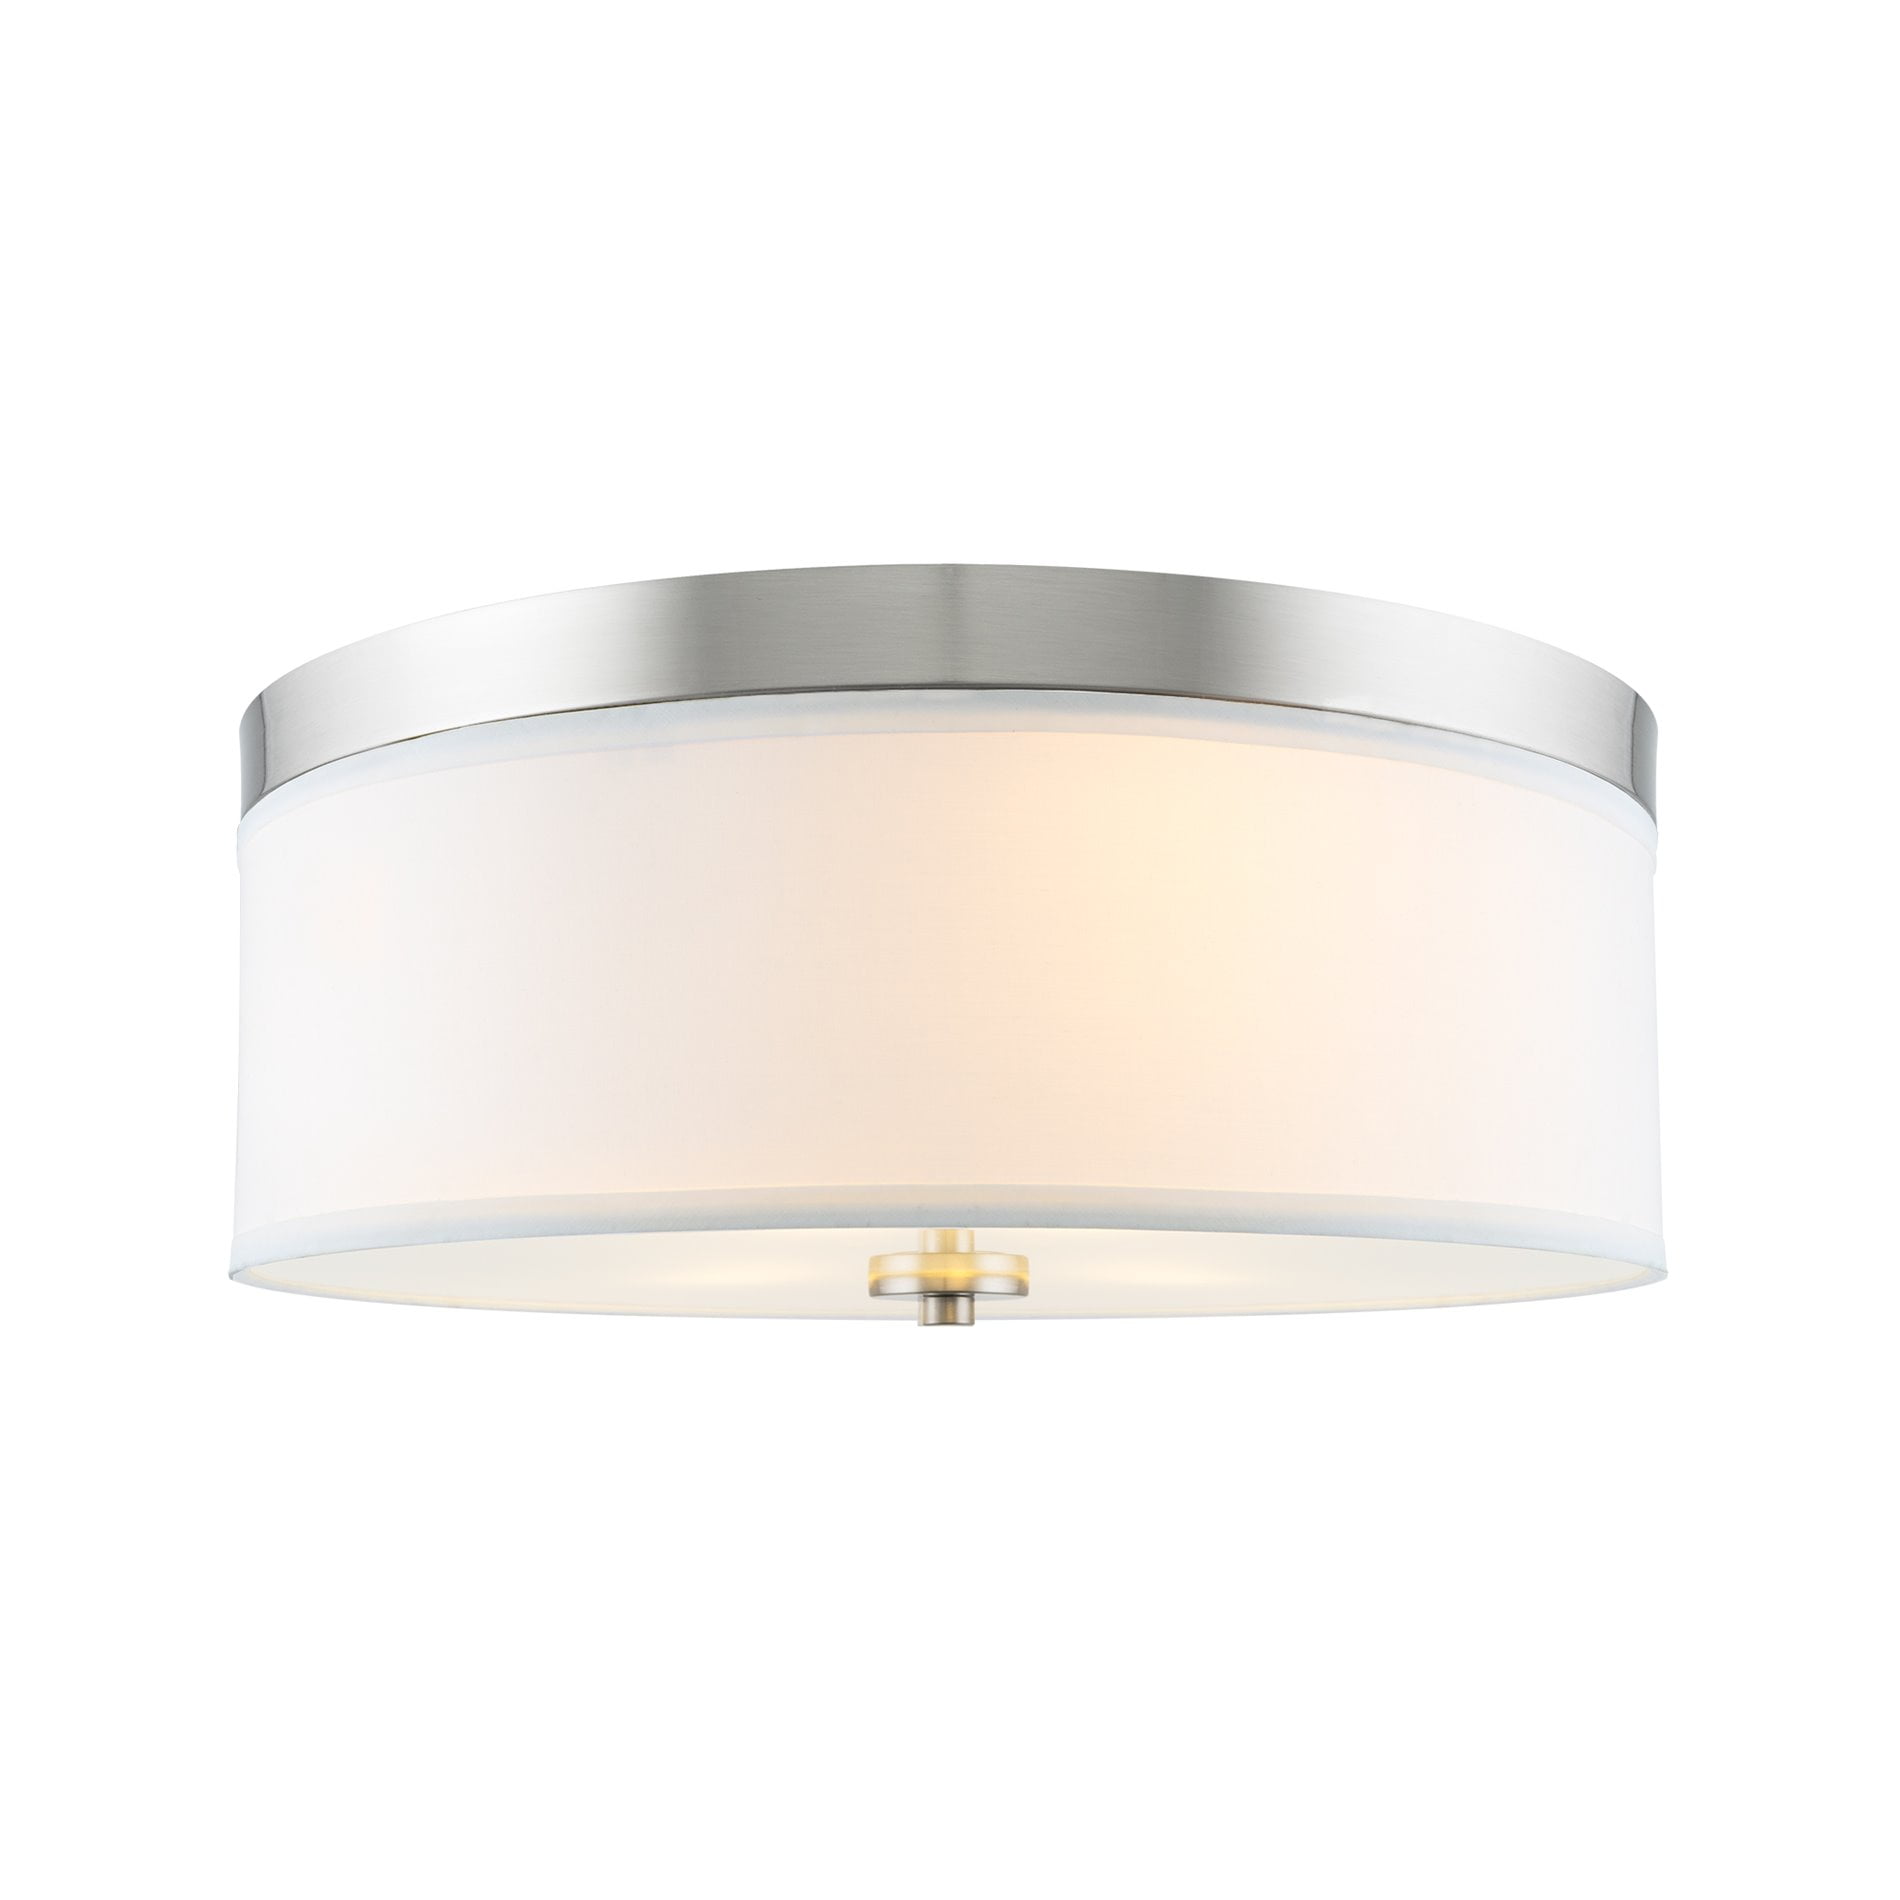 ETL Listed 18 Ceiling Fixture with Scalloped Nickel Metal Design and Glass Diffuser 4-Light Large Fabric Drum Flush Mount Damp Located 